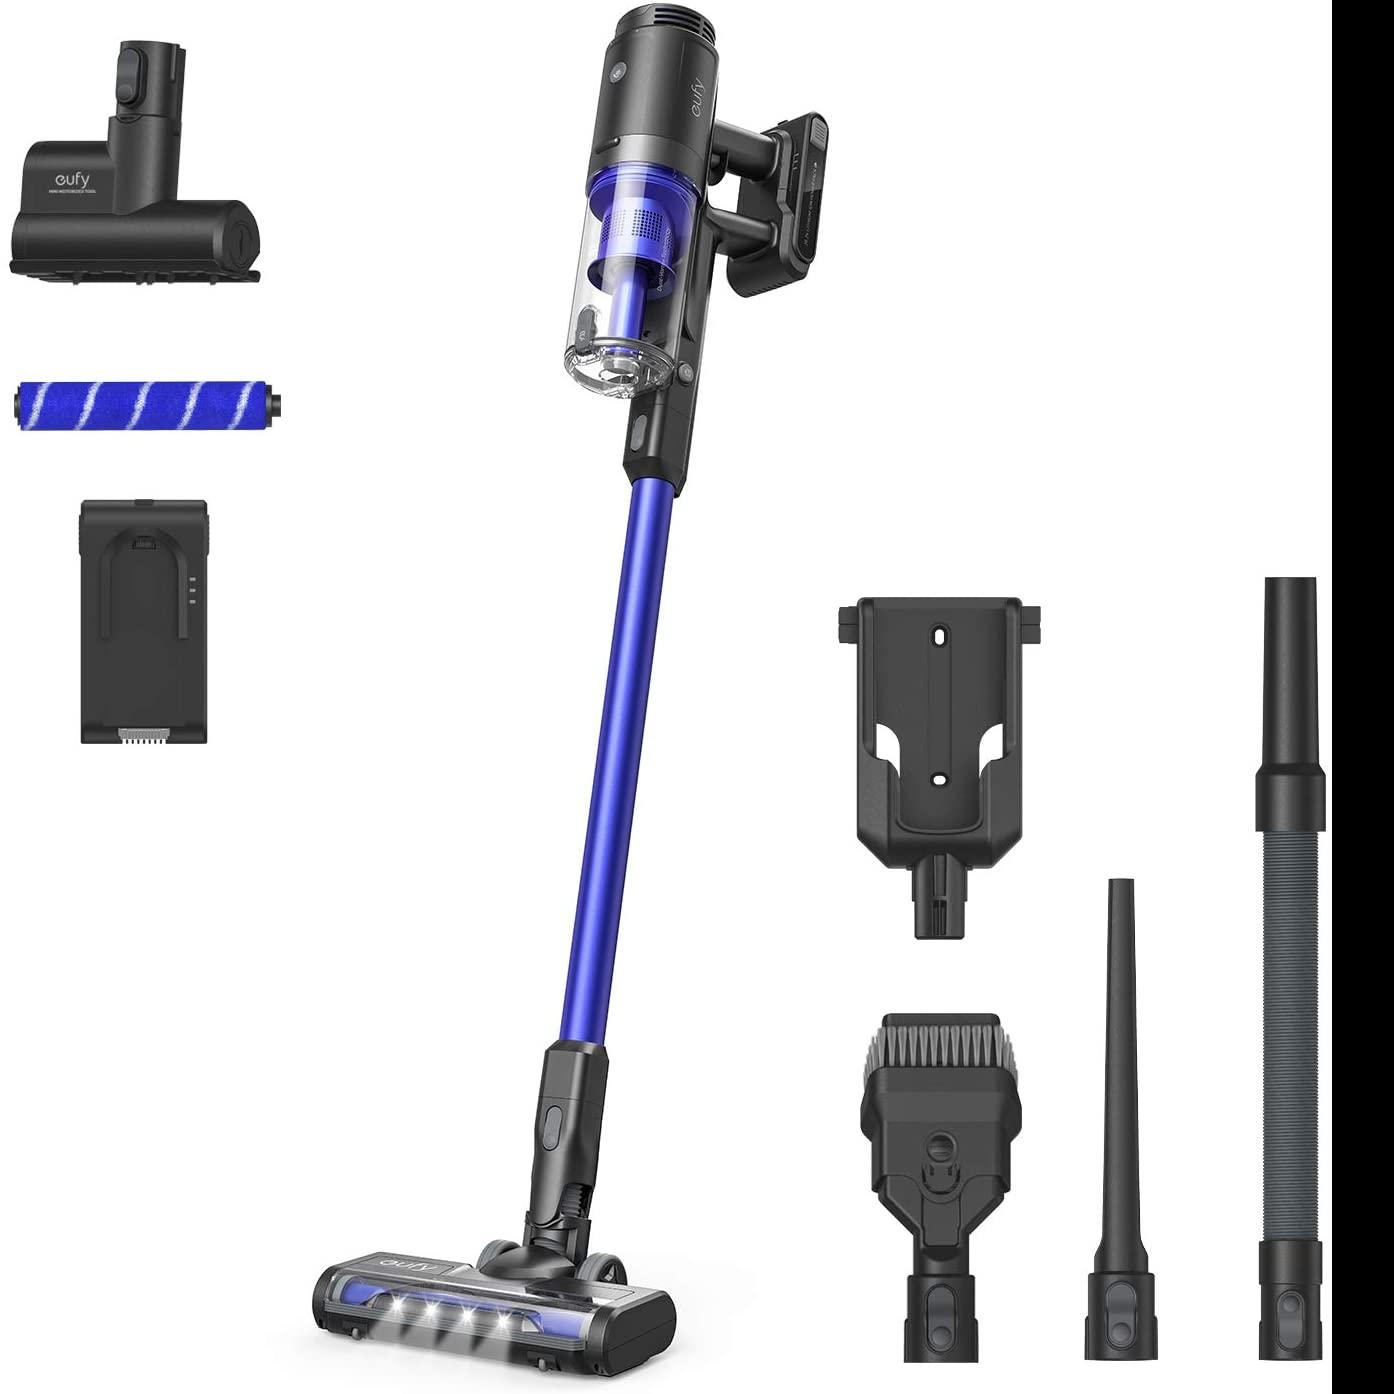 eufy by Anker HomeVac S11 Infinity Cordless Stick Vacuum Cleaner for $179.99 Shipped